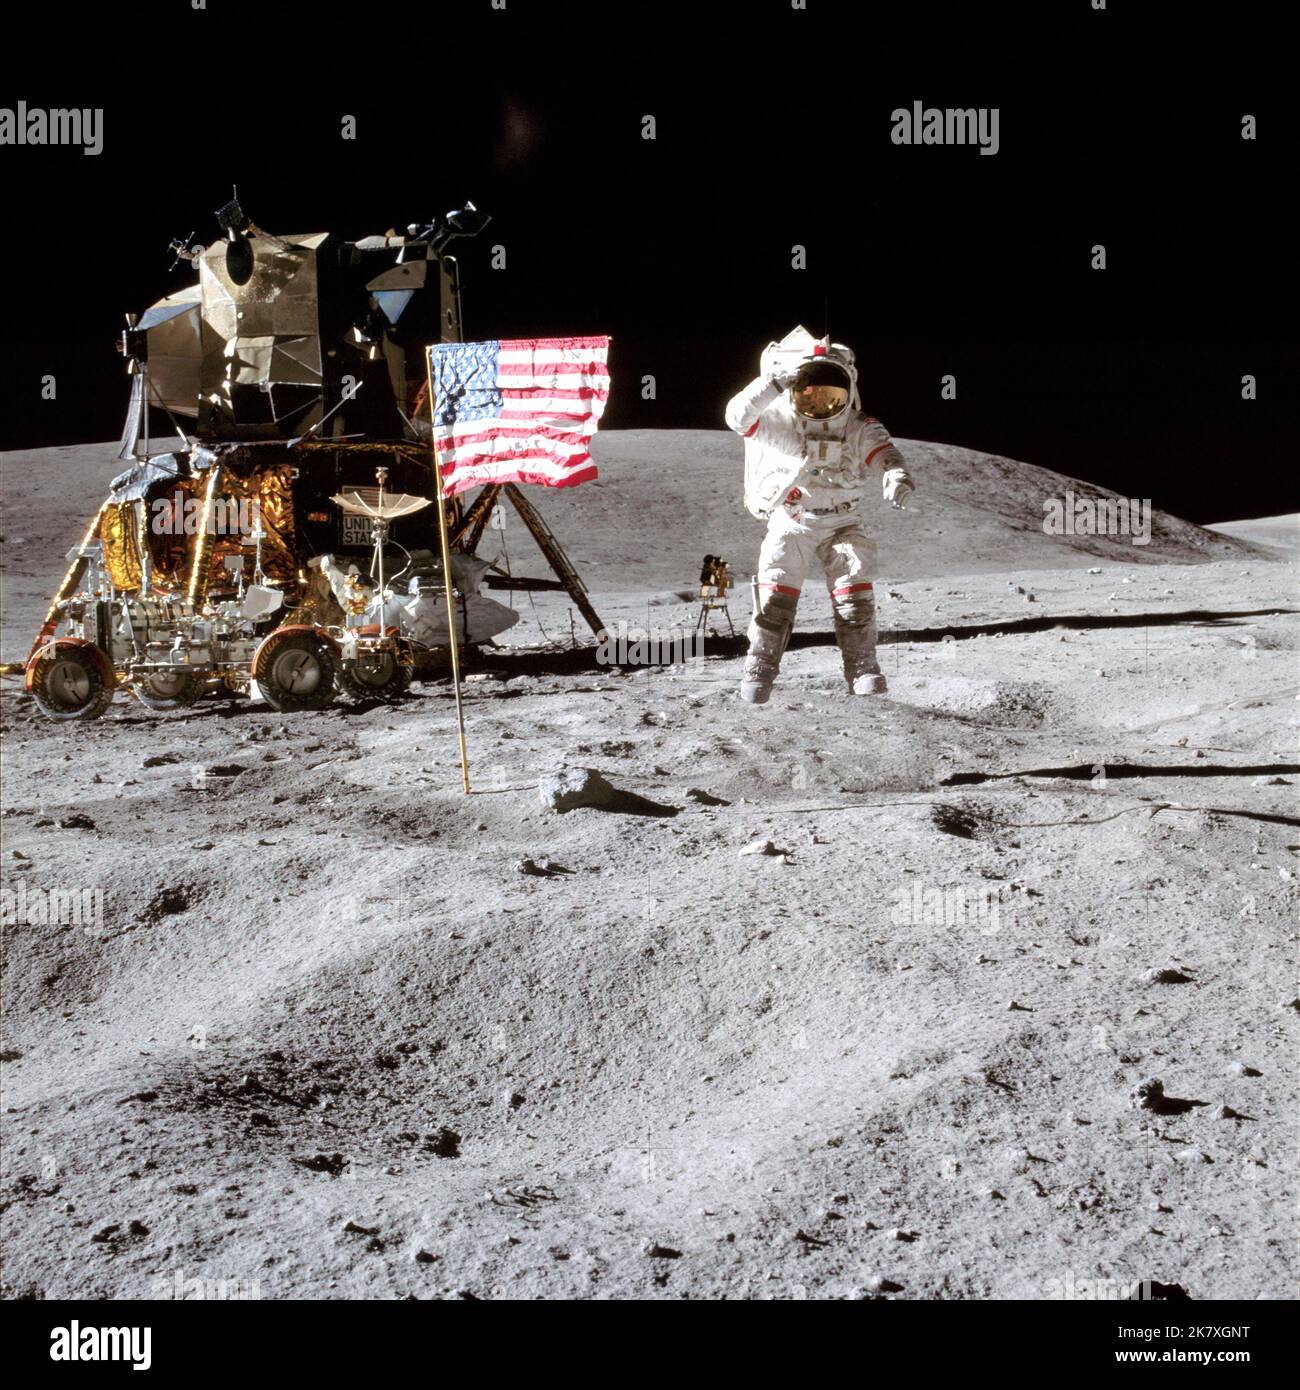 Astronaut John W. Young, commander of the Apollo 16 lunar landing mission, leaps from the lunar surface as he salutes the United States flag at the Descartes landing site during the first Apollo 16 extravehicular activity. Astronaut Charles M. Duke Jr., lunar module pilot, took this picture. The Lunar Module 'Orion' is on the left. The Lunar Roving Vehicle is parked beside Orion and the object behind Young (in the shadow of the Lunar Module) is the Far Ultraviolet Camera/Spectrograph. Stone Mountain dominates the background of this lunar scene.  Image Credit: NASA Stock Photo